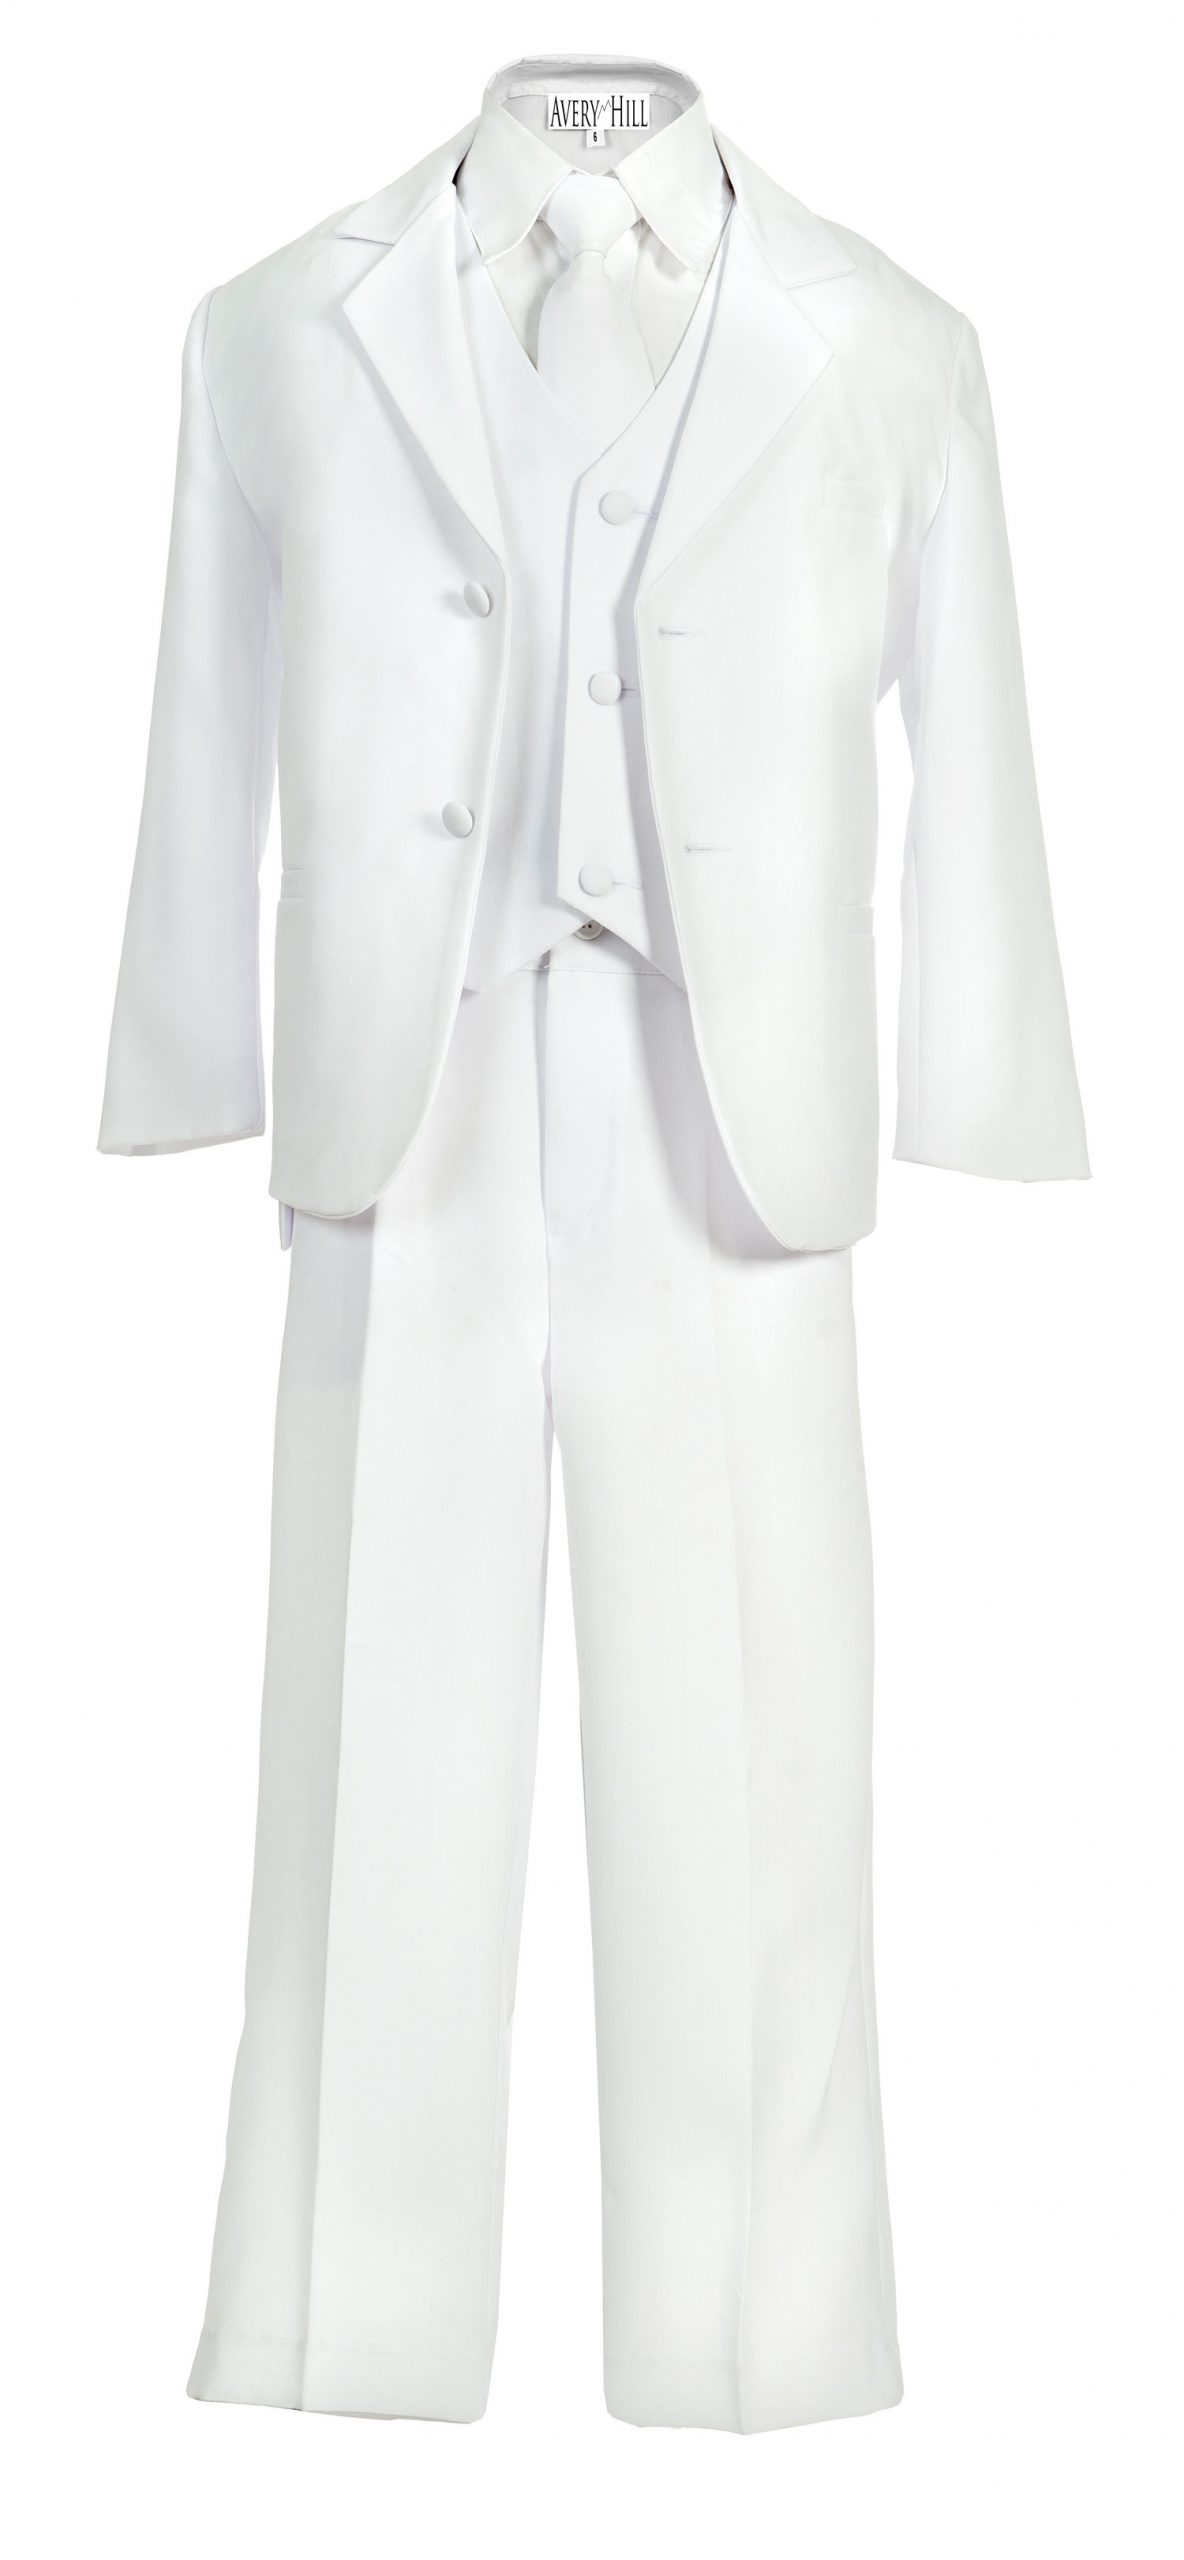 Avery Hill Boys Formal 5 Piece Suit with Shirt and Vest White - 4T